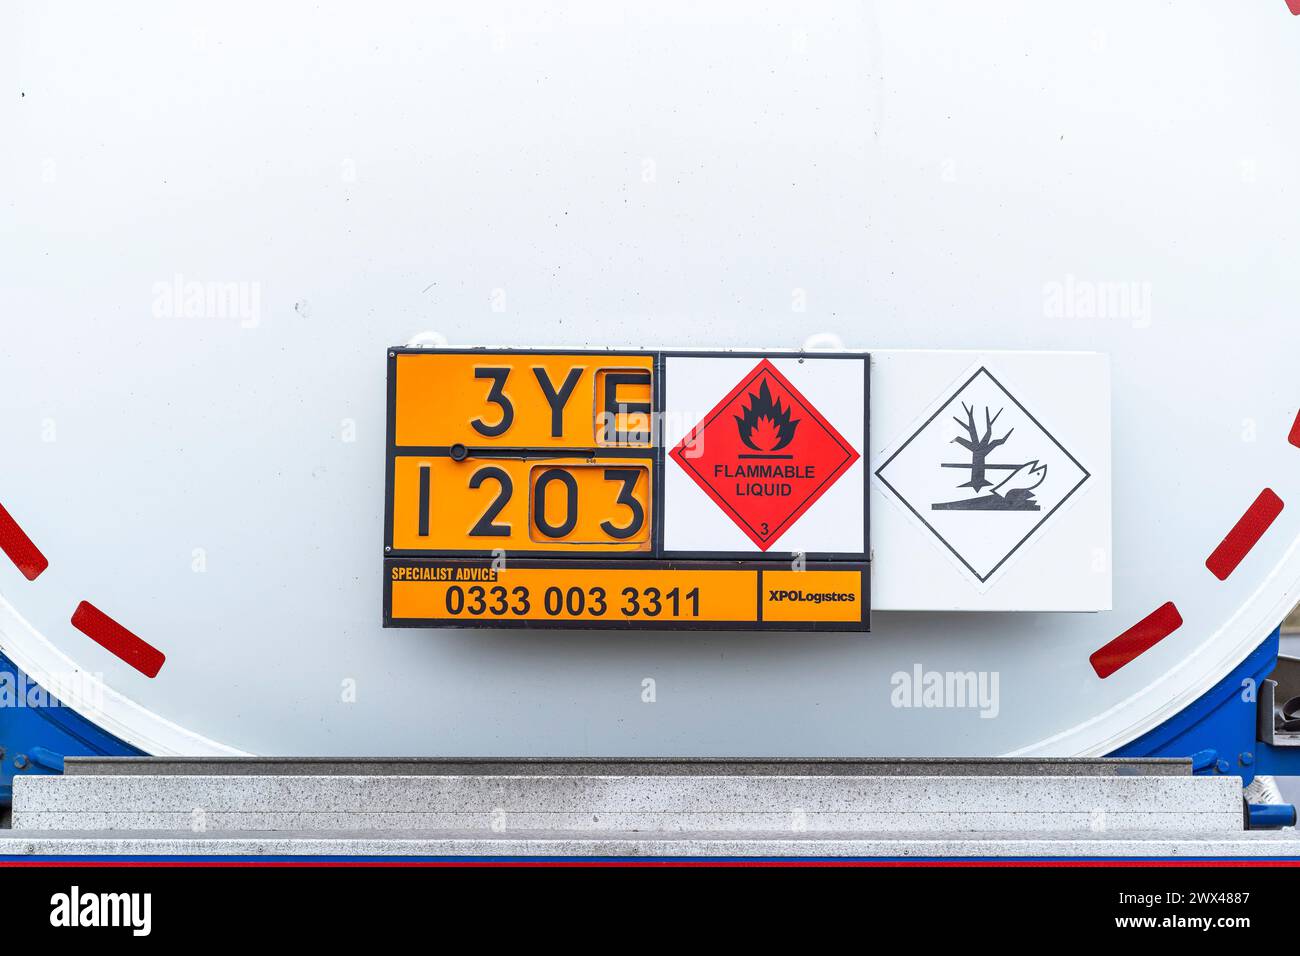 Close up rear view of a petrol tanker with a flammable liquid warning sign. Stock Photo